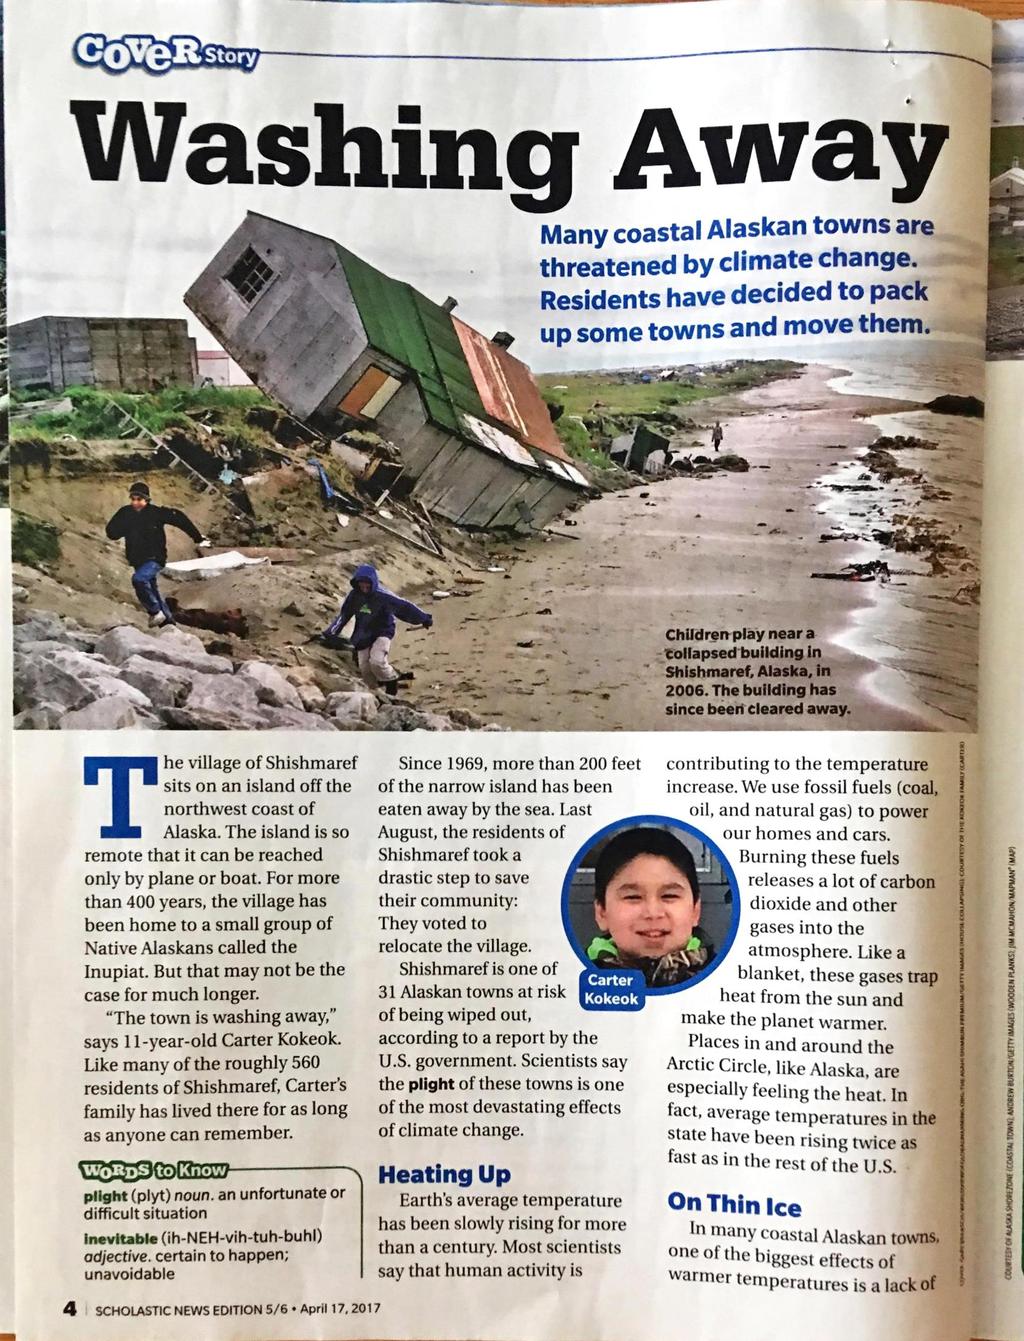 COVeRstory Washing Away Many coastal Alaskan towns are threatened by climate change. Residents have decided to pack up some towns and move them.